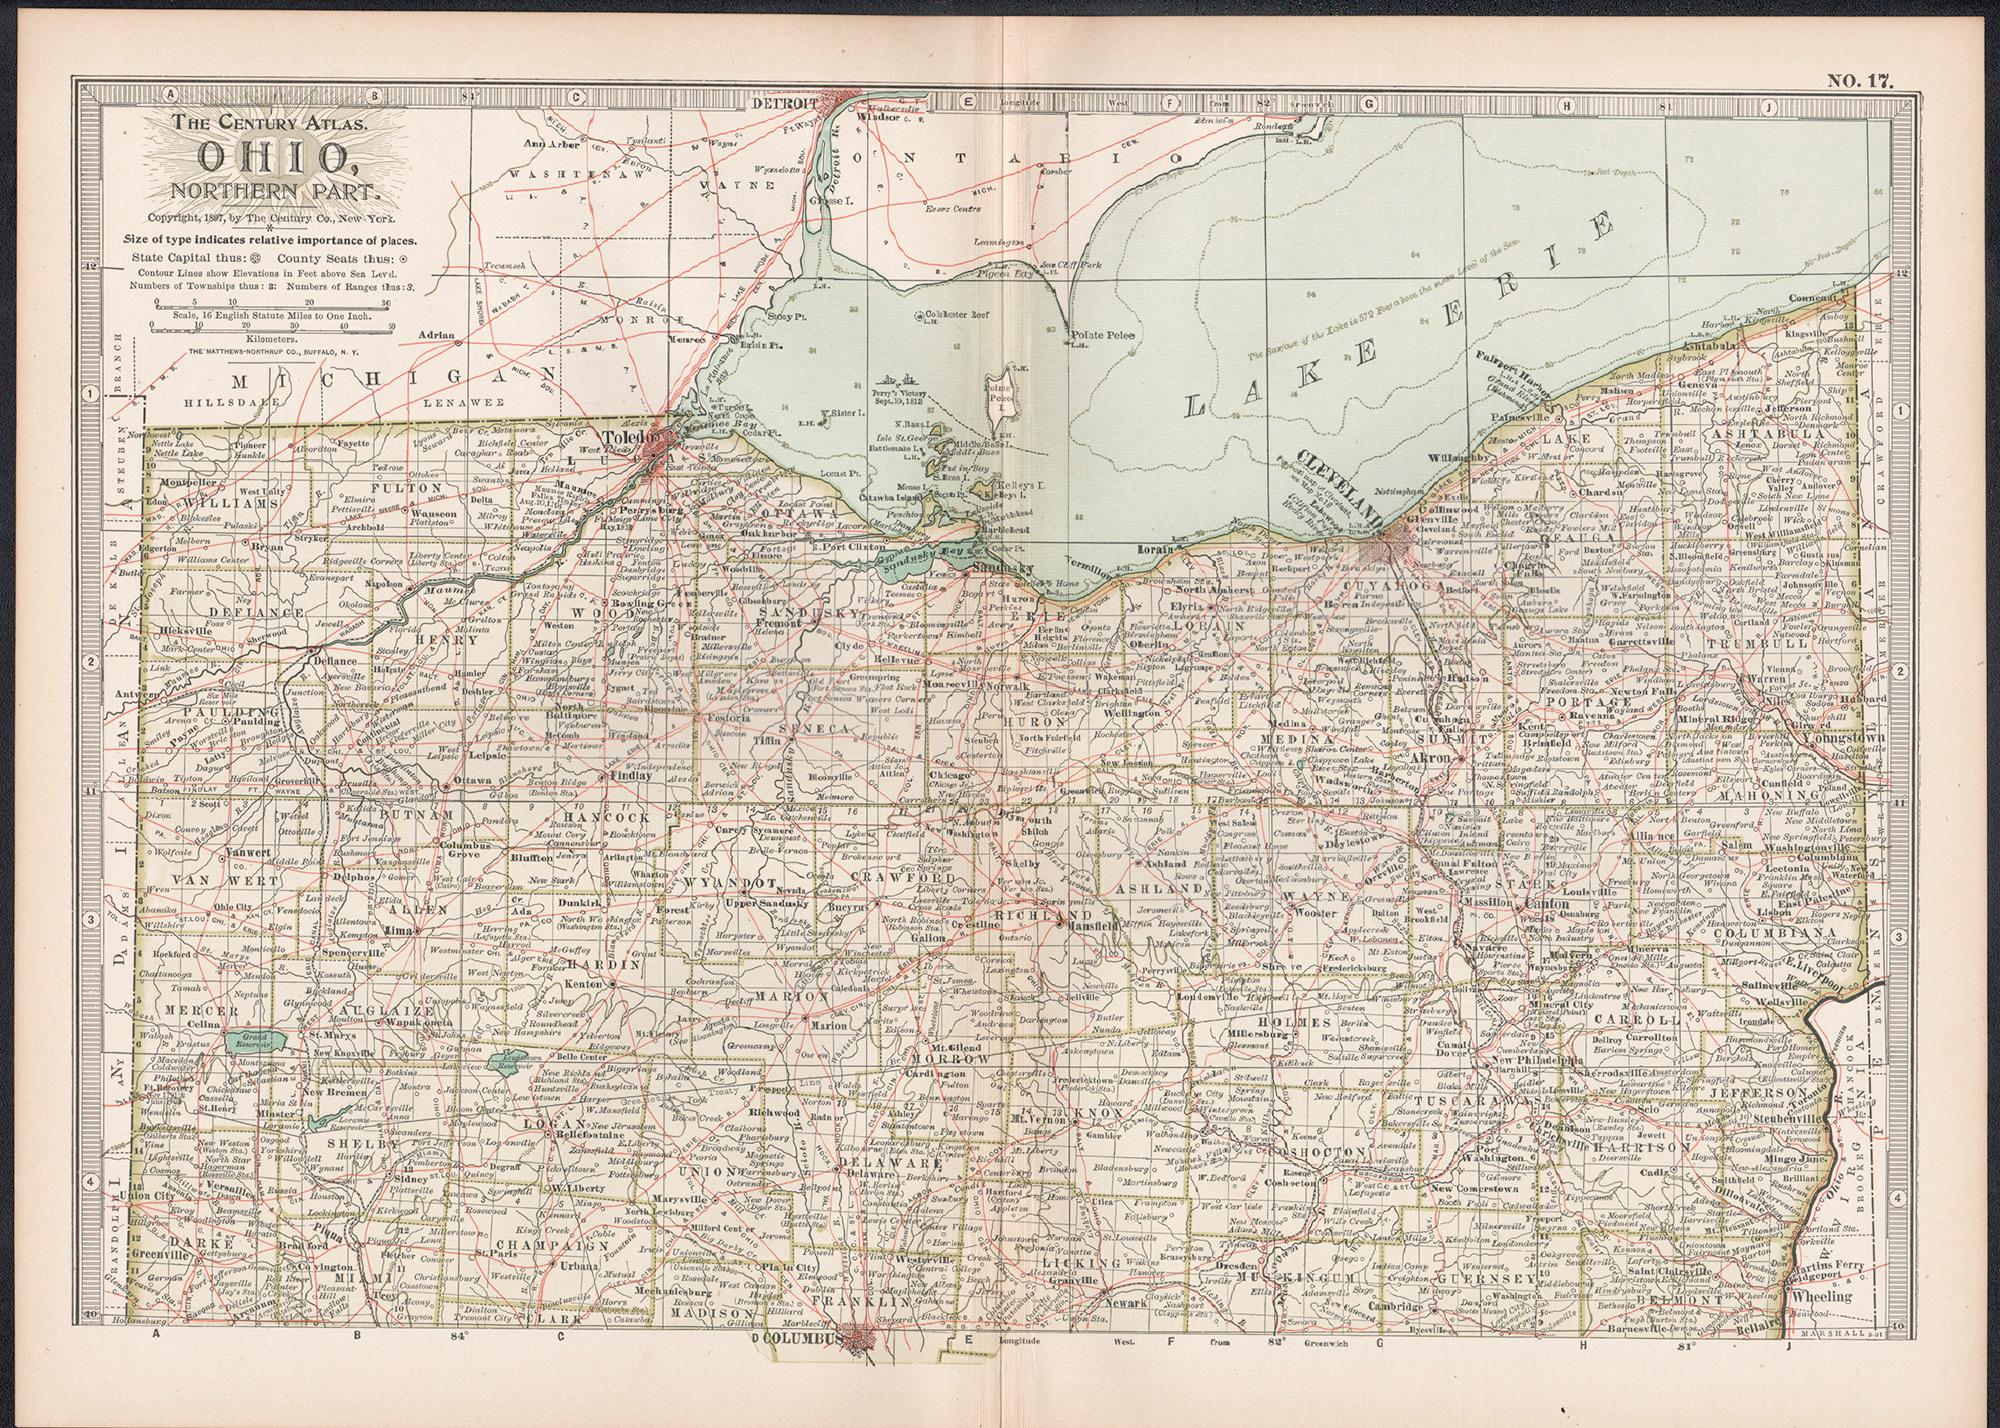 Ohio, Northern Part. USA. Century Atlas state antique vintage map - Print by Unknown